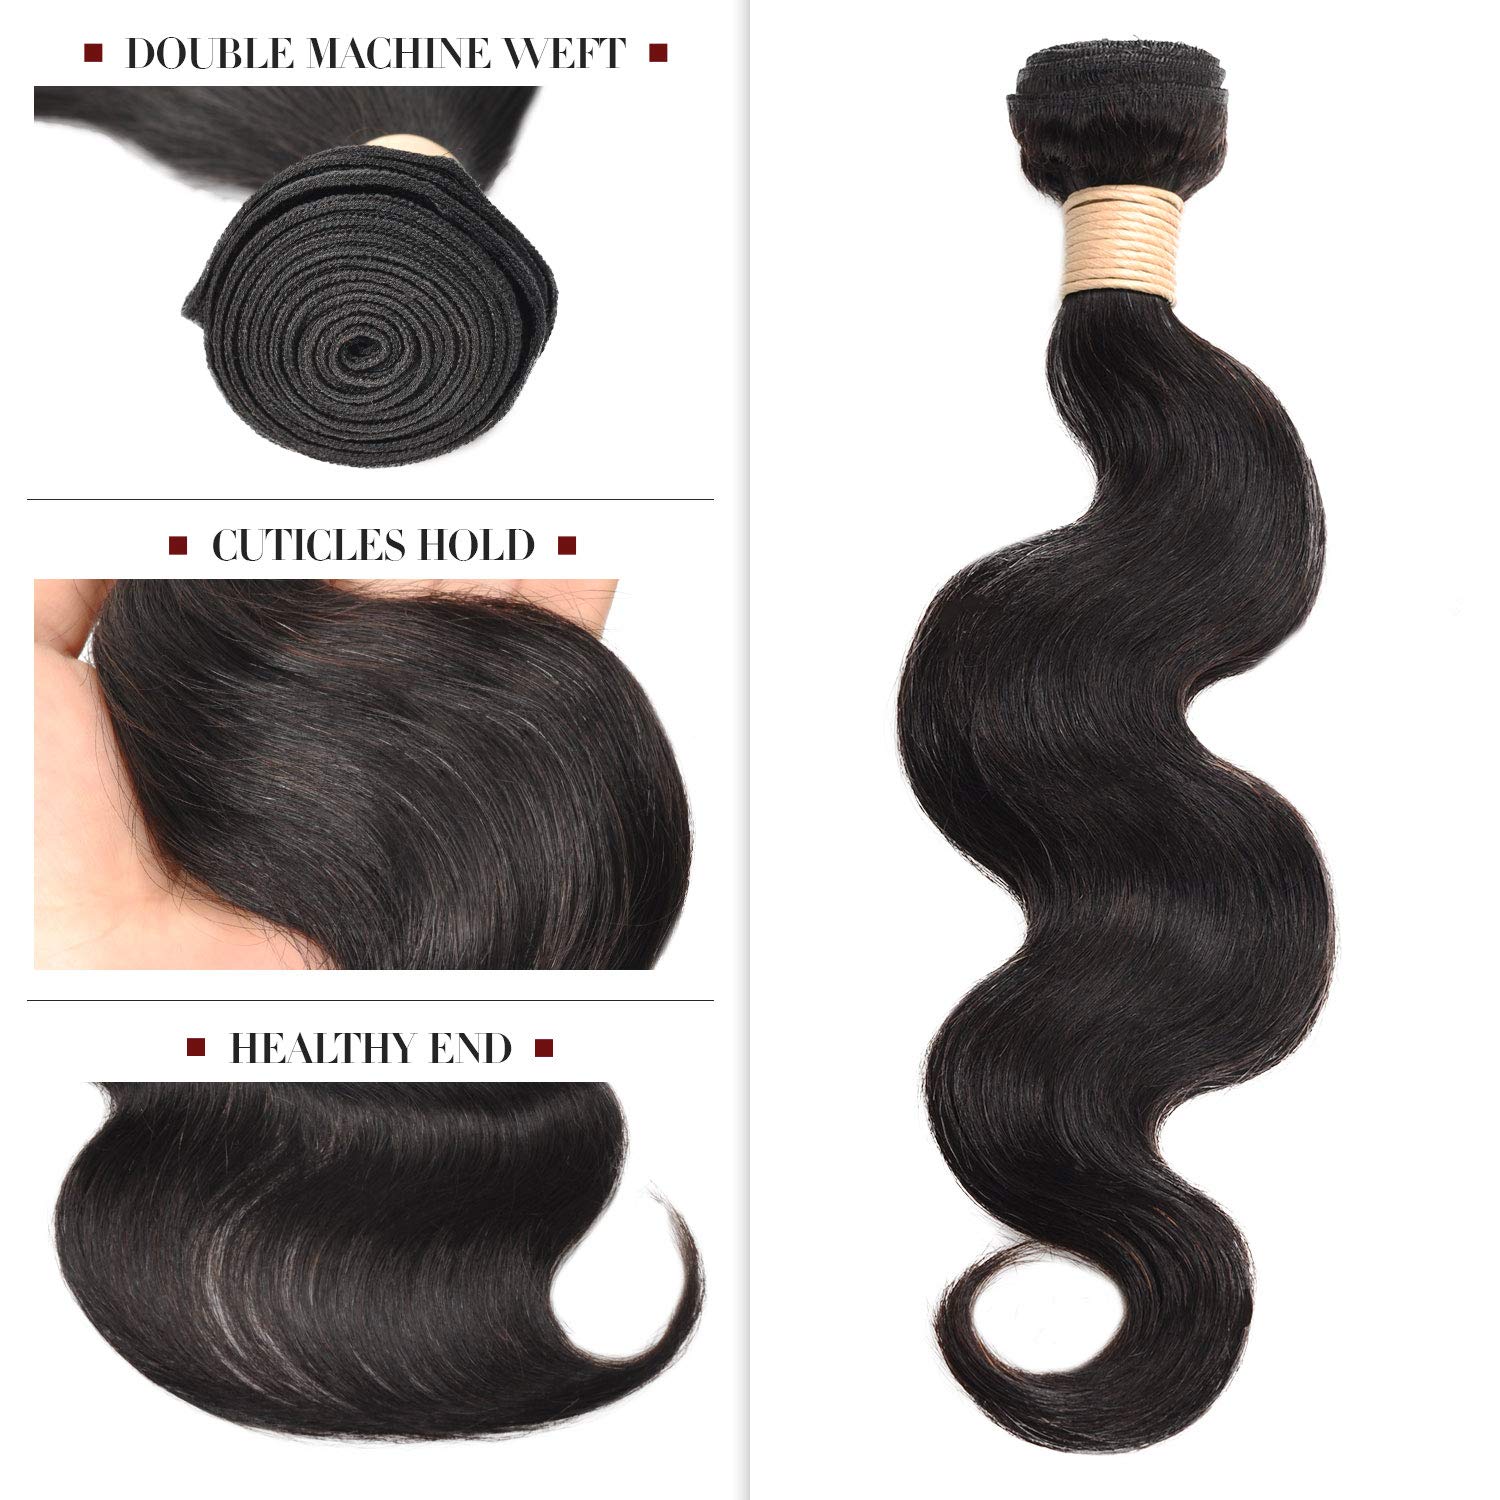 Beautiful Hair 100% Virgin Remy Human Hair Unprocessed Brazilian Bundle Hair Weave Natural Body Wave 7A 3 Bundles, 4 Bundles, Natural Color Find Your New Look Today!